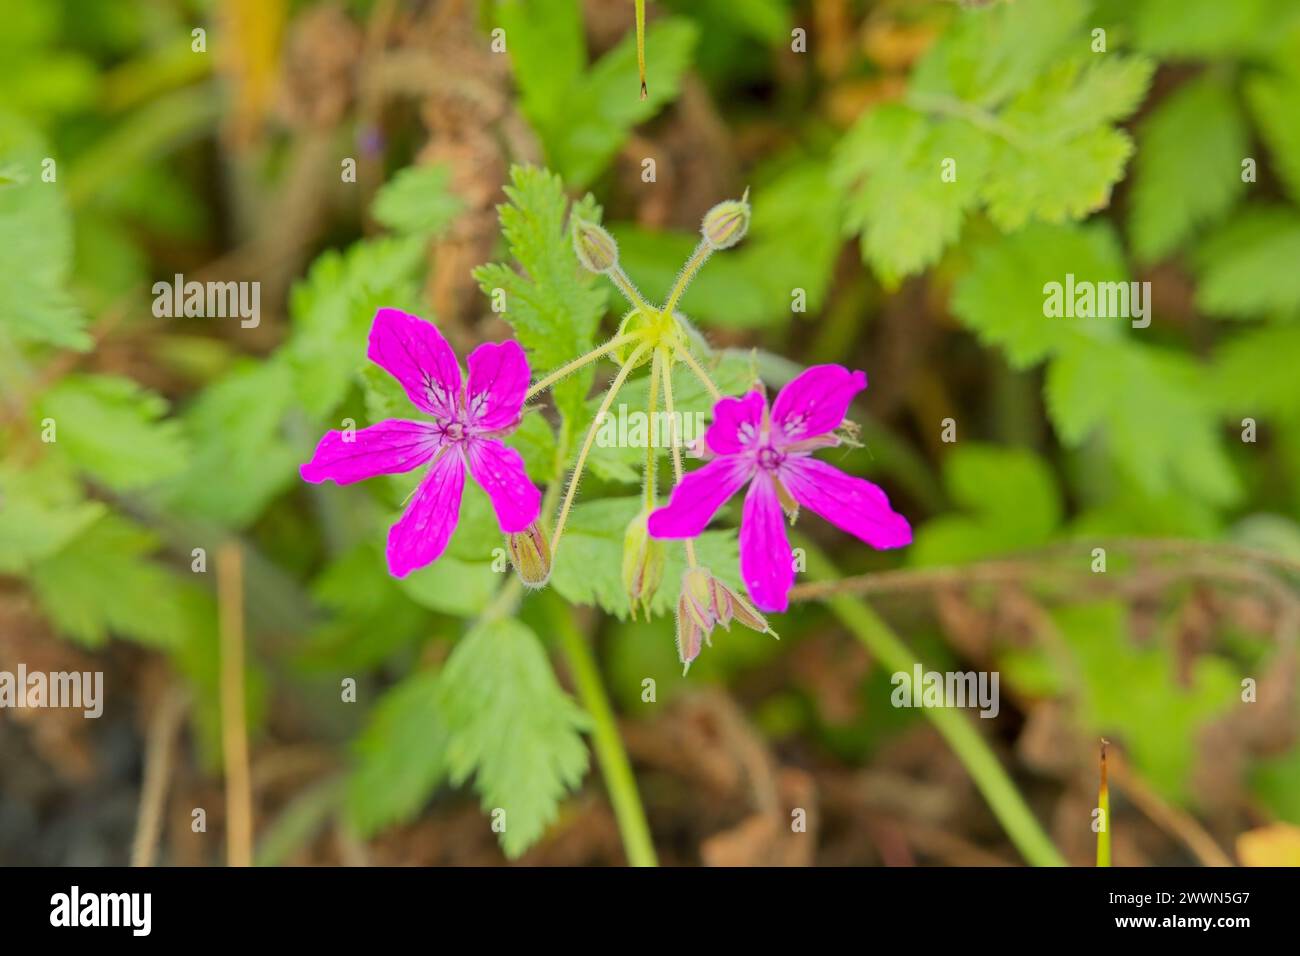 Closeup of Erodium manescavi, called the garden stork's-bill, Manescau storksbill, Manescau heronsbill and showy heron's bill, is a species of floweri Stock Photo